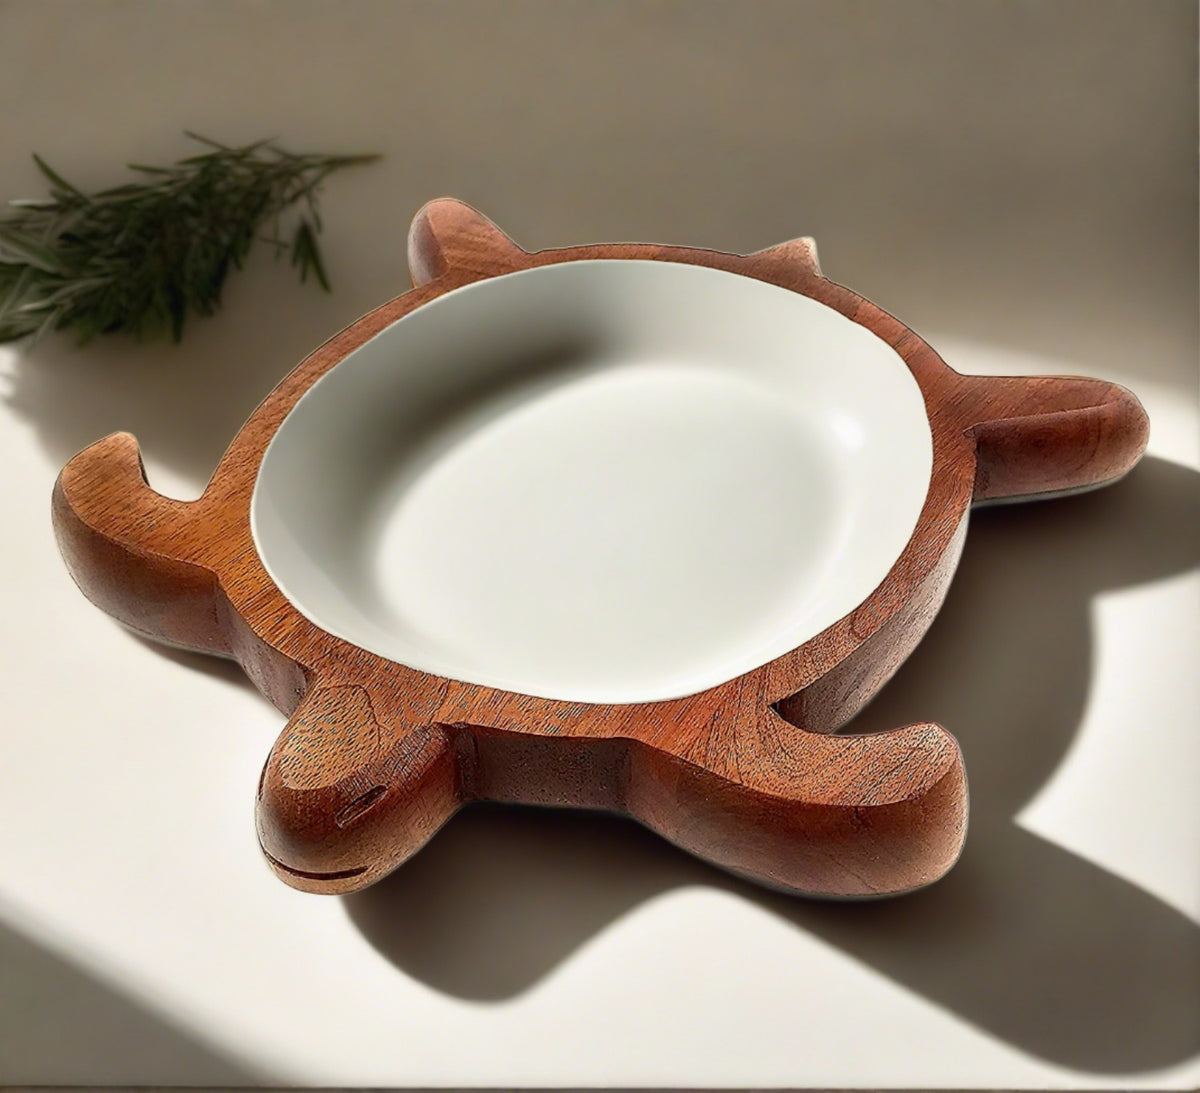 Handcrafted turtle inspired platter for serving